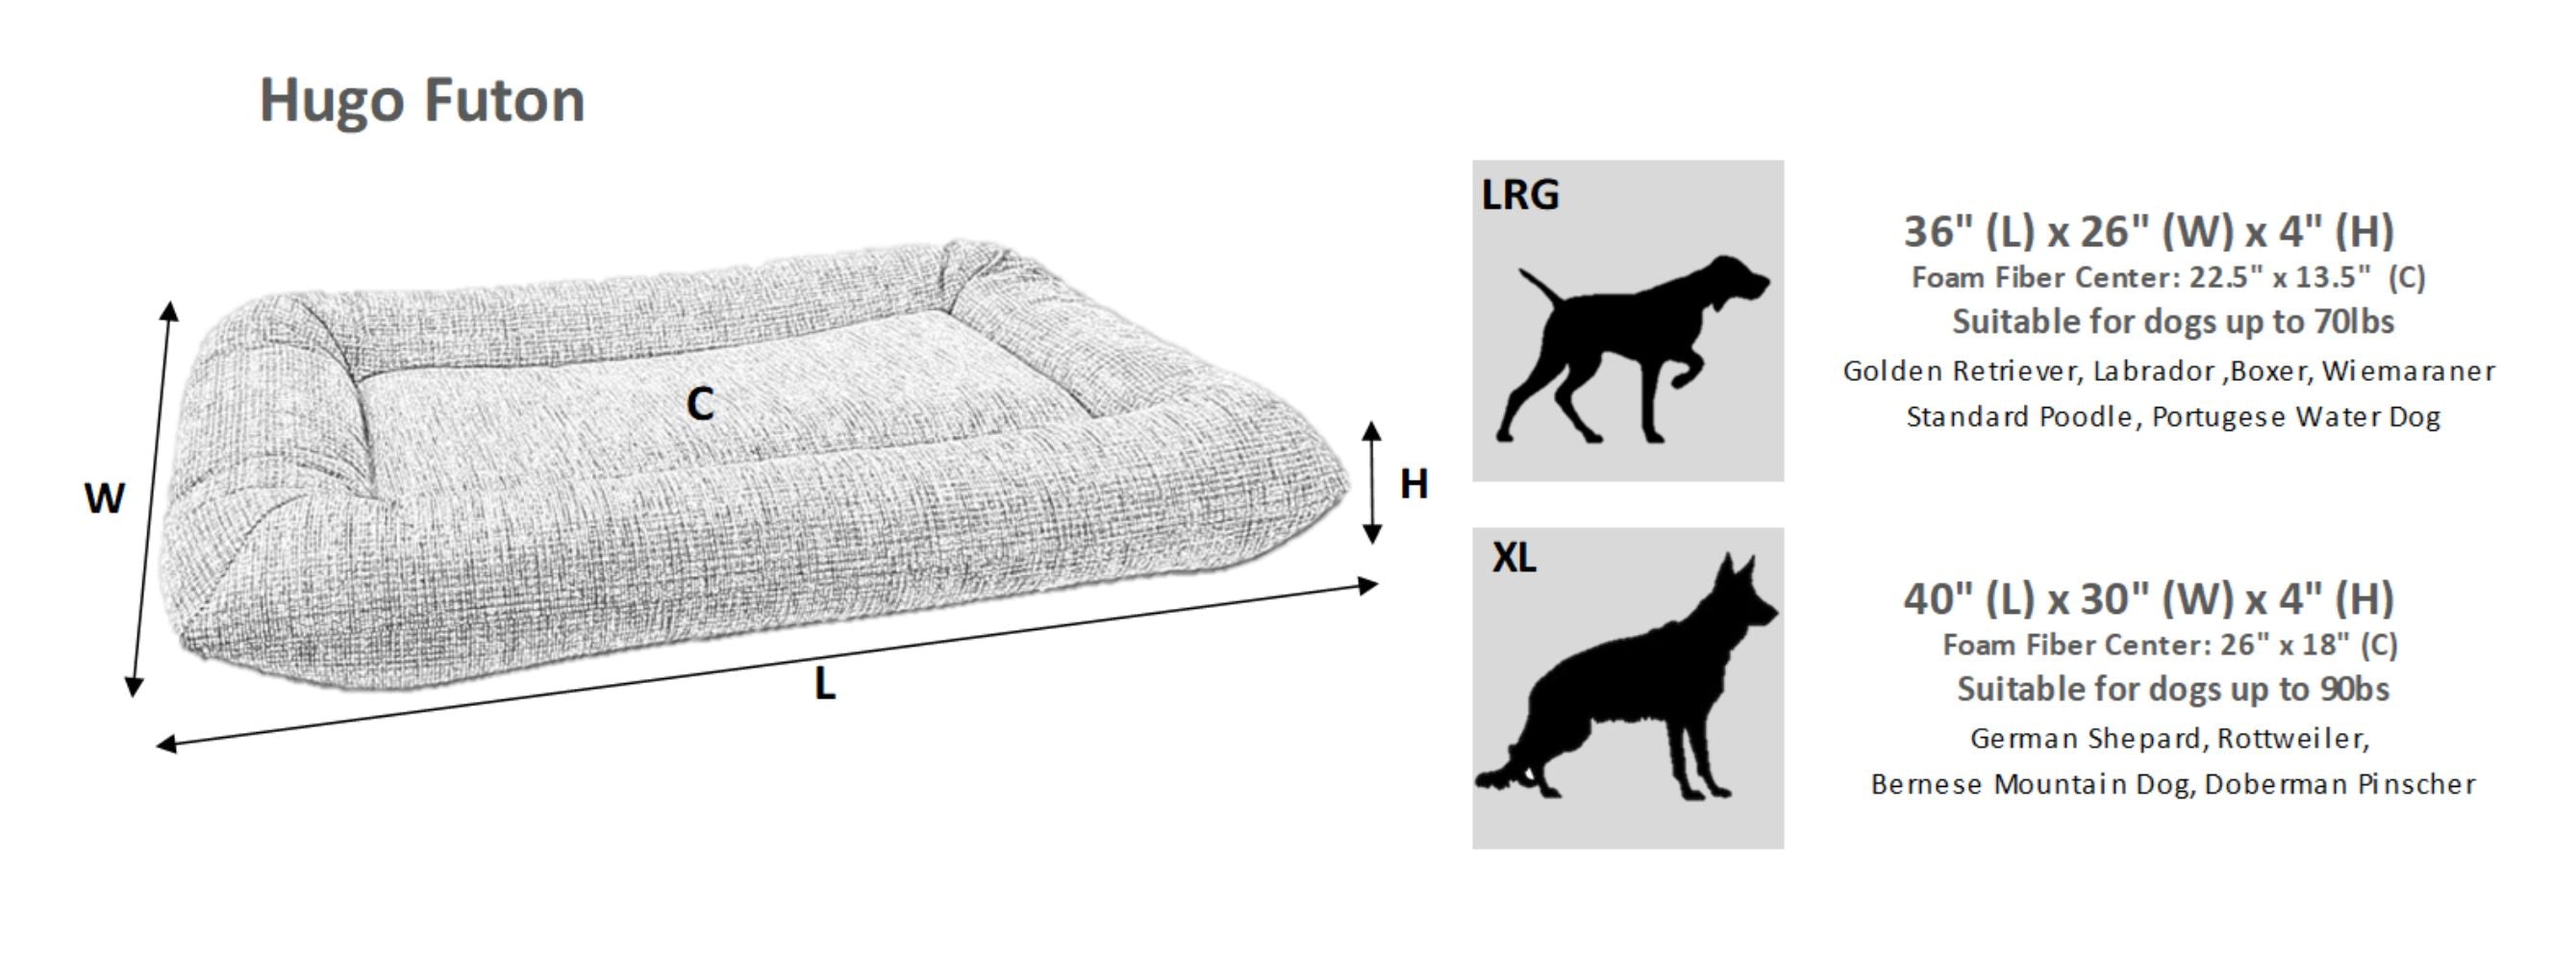 Bowsers The Hugo Futon Dog Bed Size Guide